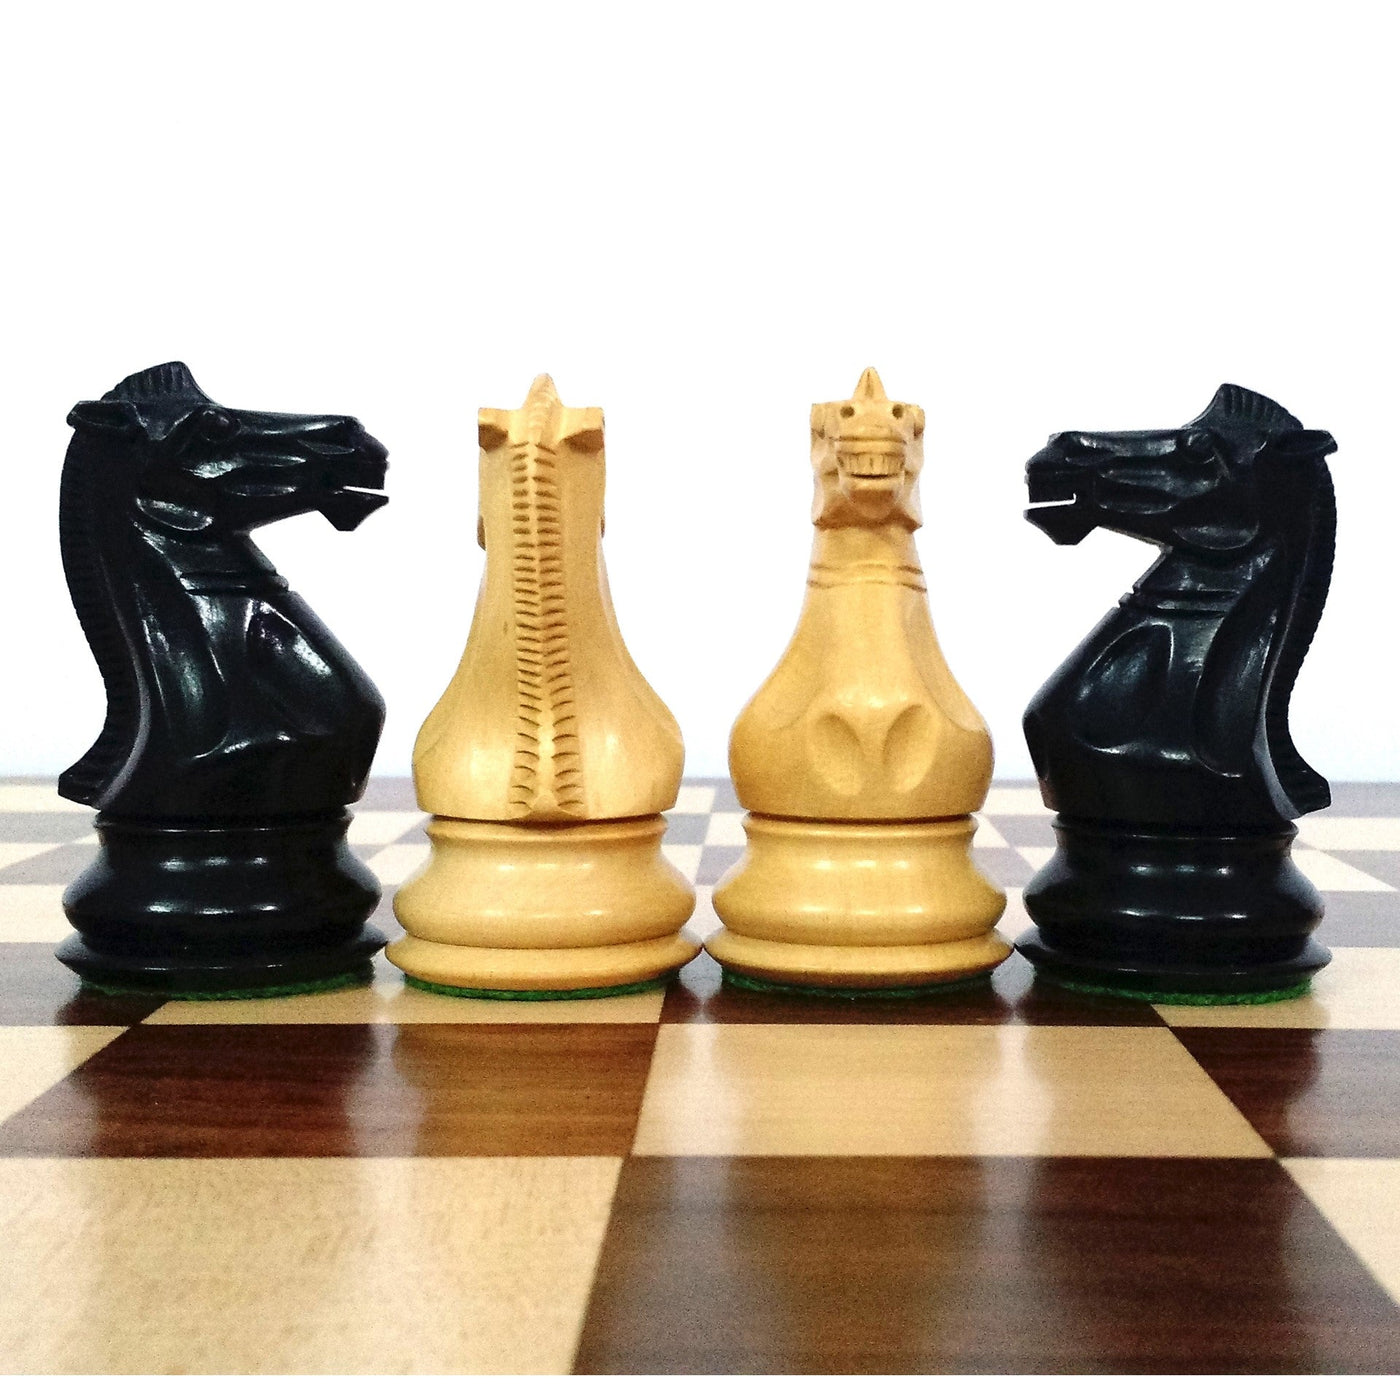 Slightly Imperfect 4.1" Pro Staunton Weighted Wooden Chess Set - Chess Pieces Only - Ebonised wood